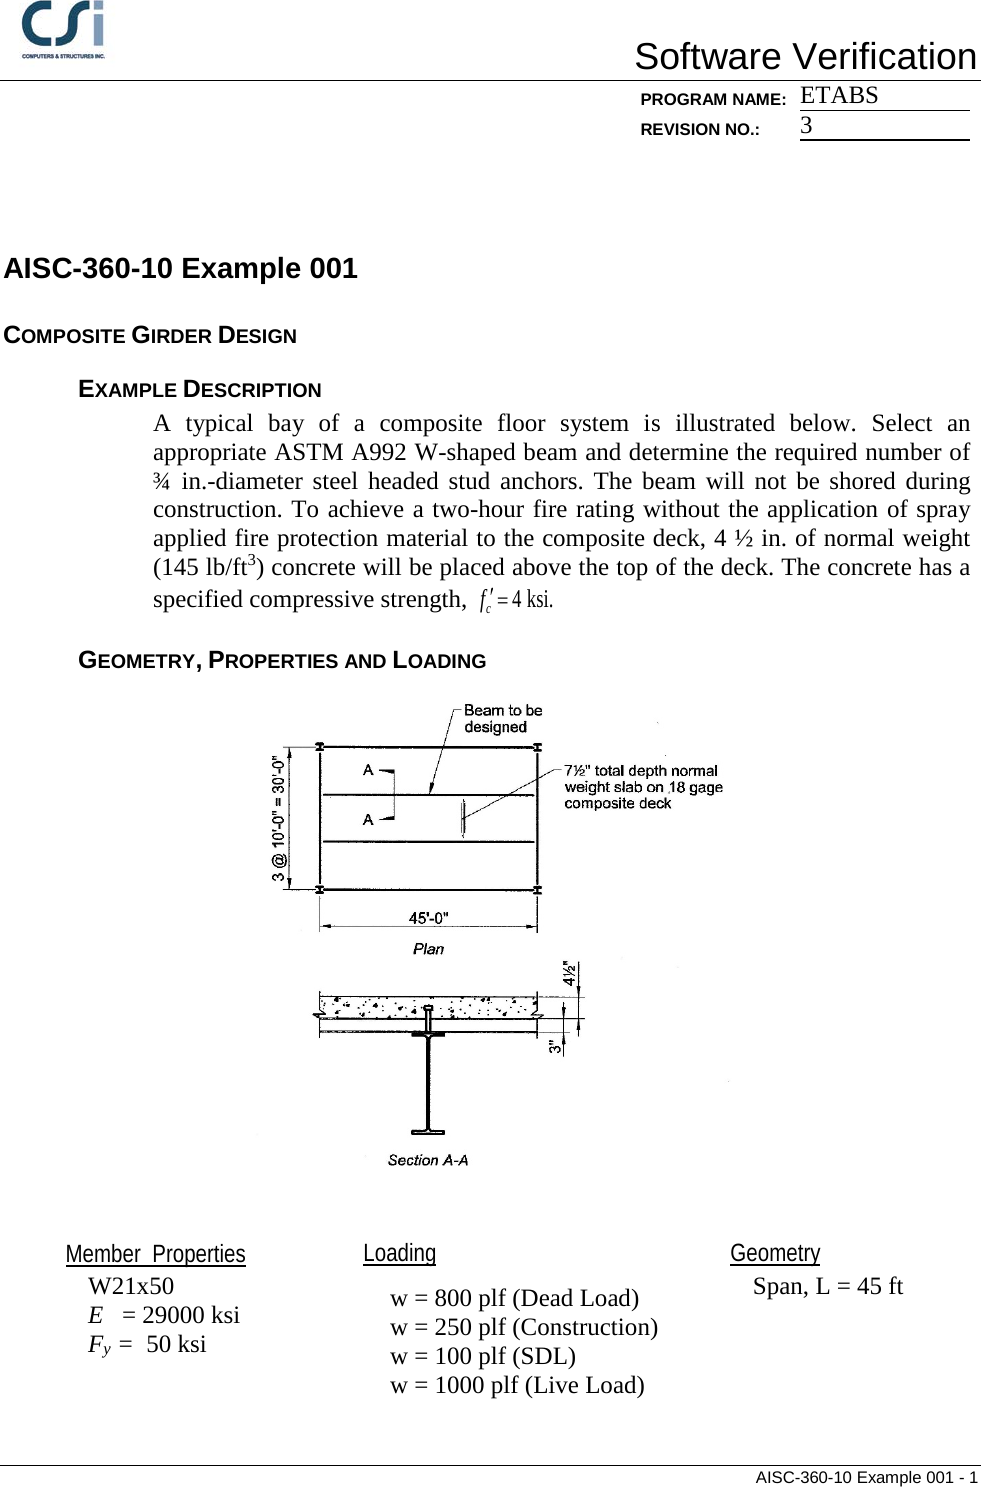 Contents Aisc 360 10 Example 001